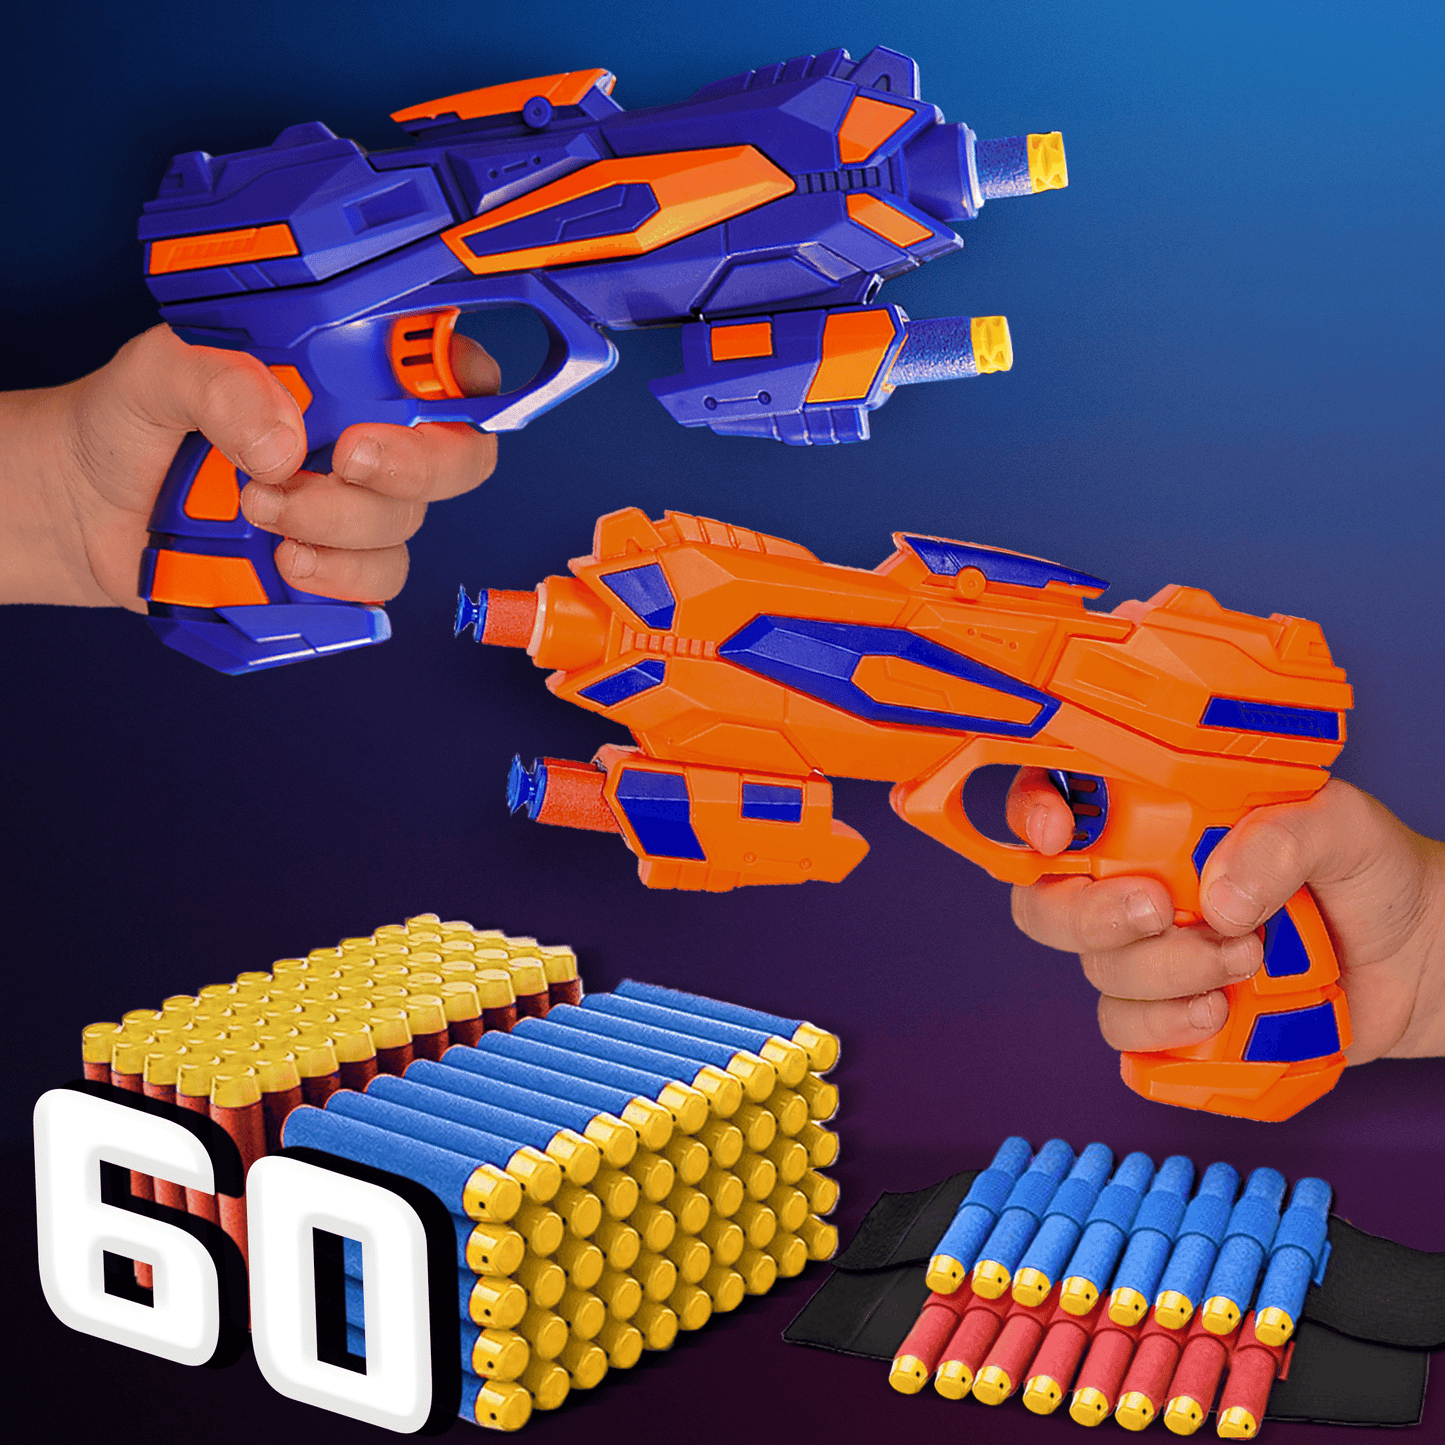 Action shot of hands holding JoyX blaster guns in blue and orange with foam darts and score counters on a purple background.